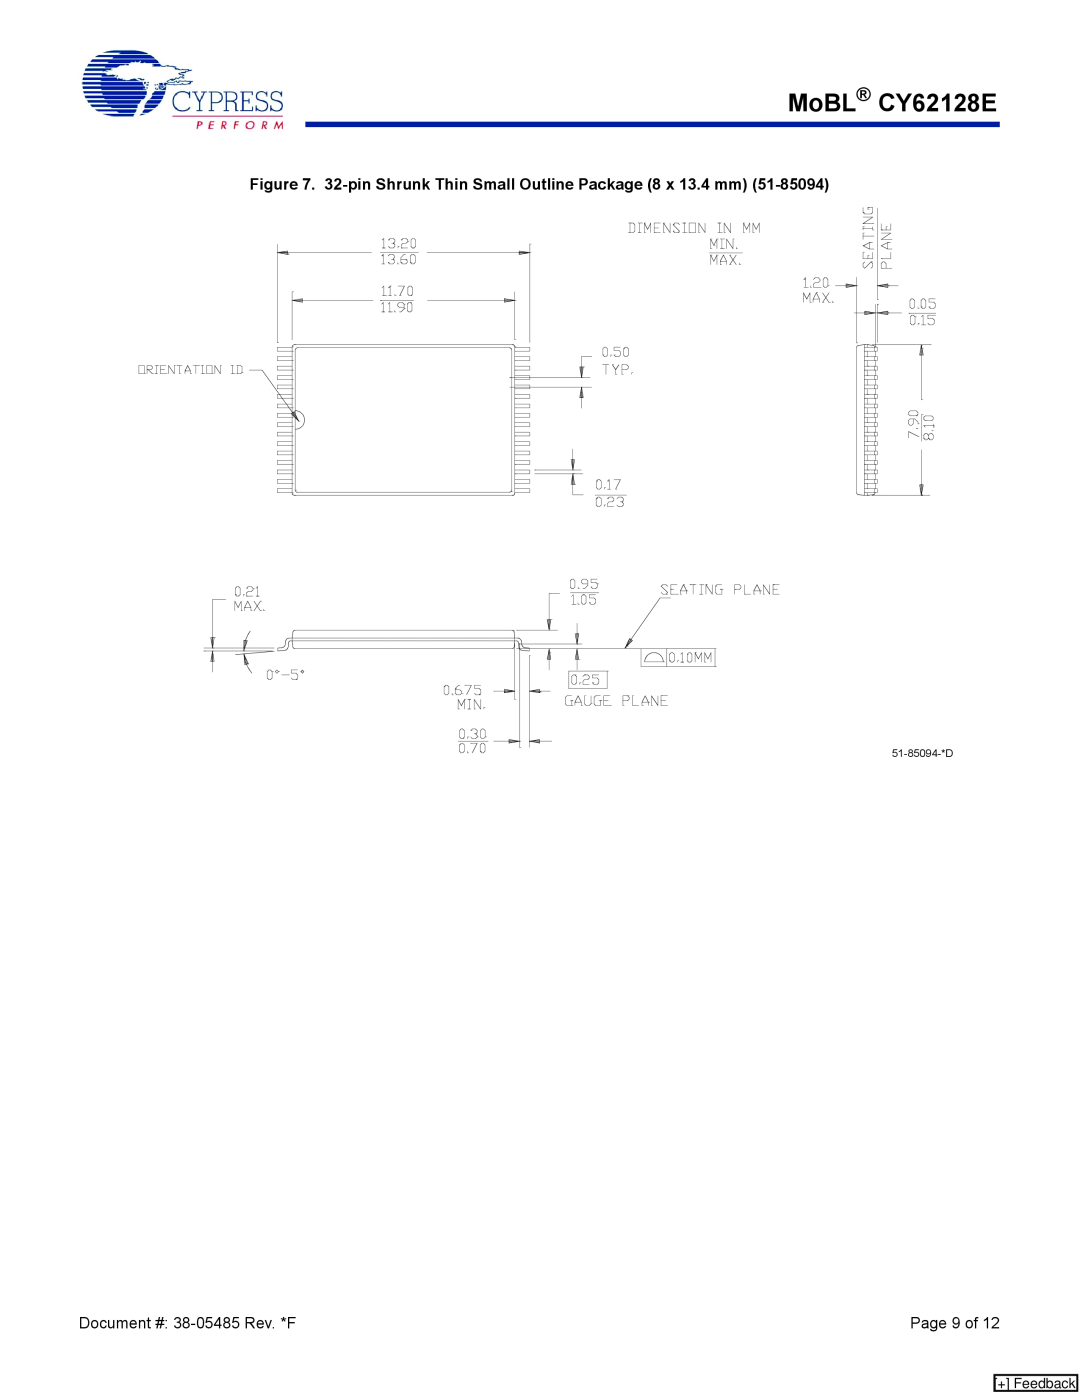 Cypress manual MoBL CY62128E, 32-pin Shrunk Thin Small Outline Package 8 x 13.4 mm, Page 9 of, + Feedback 